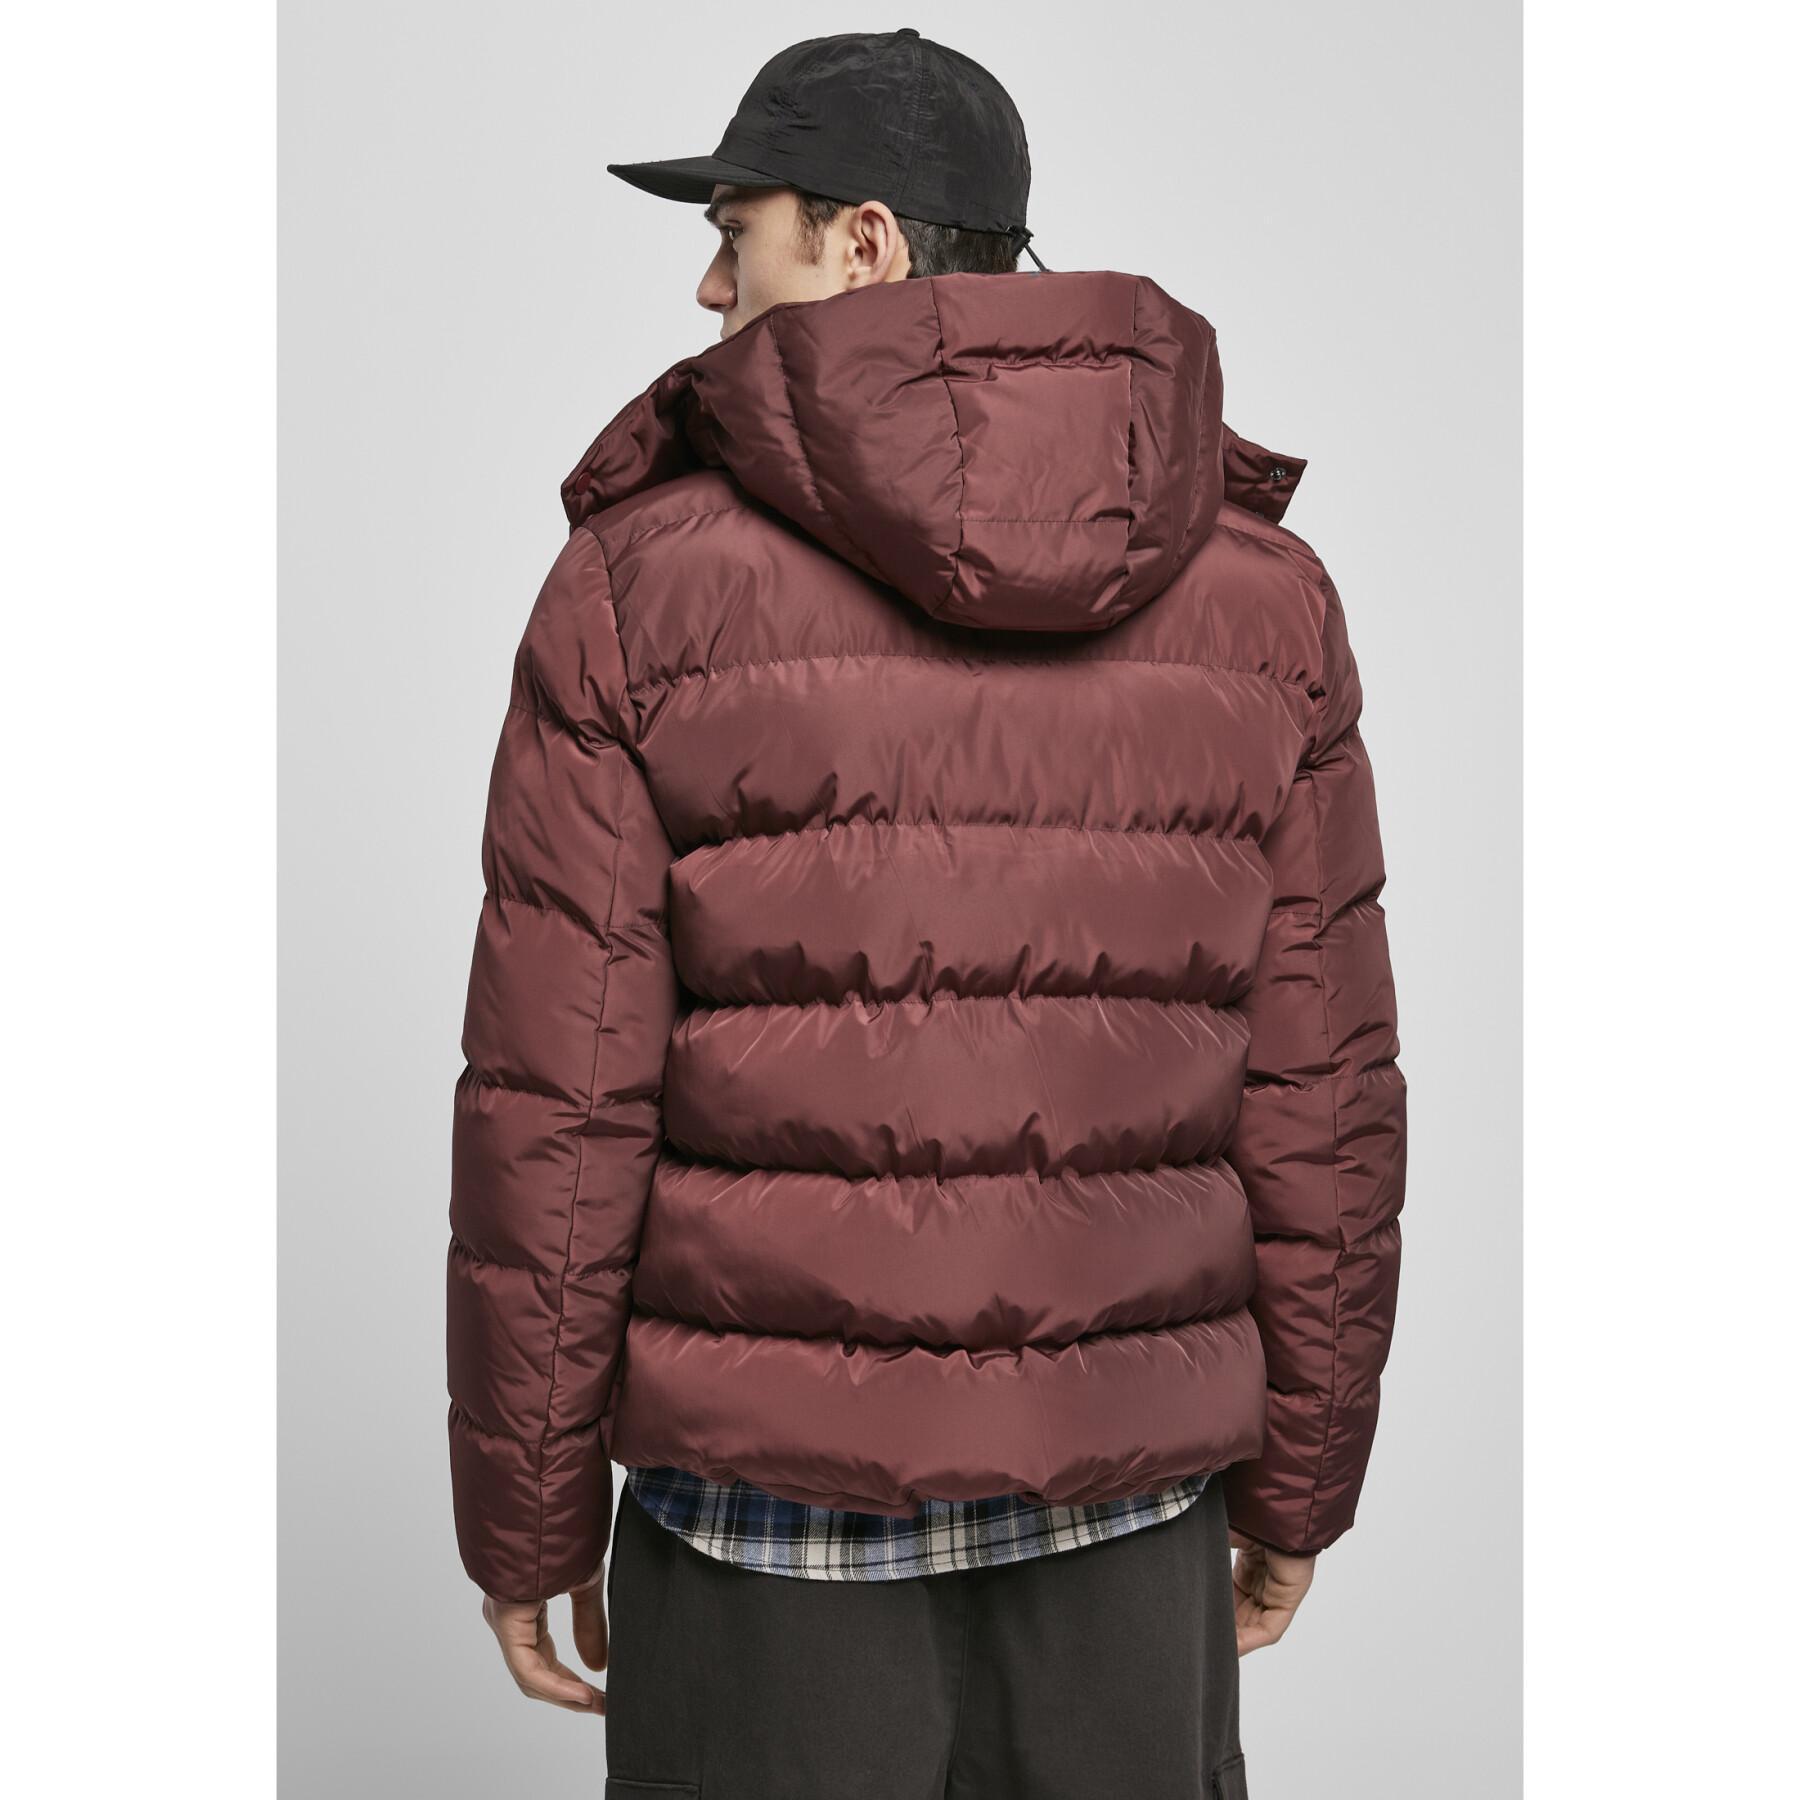 Veste Urban Classics hooded puffer-grandes tailles